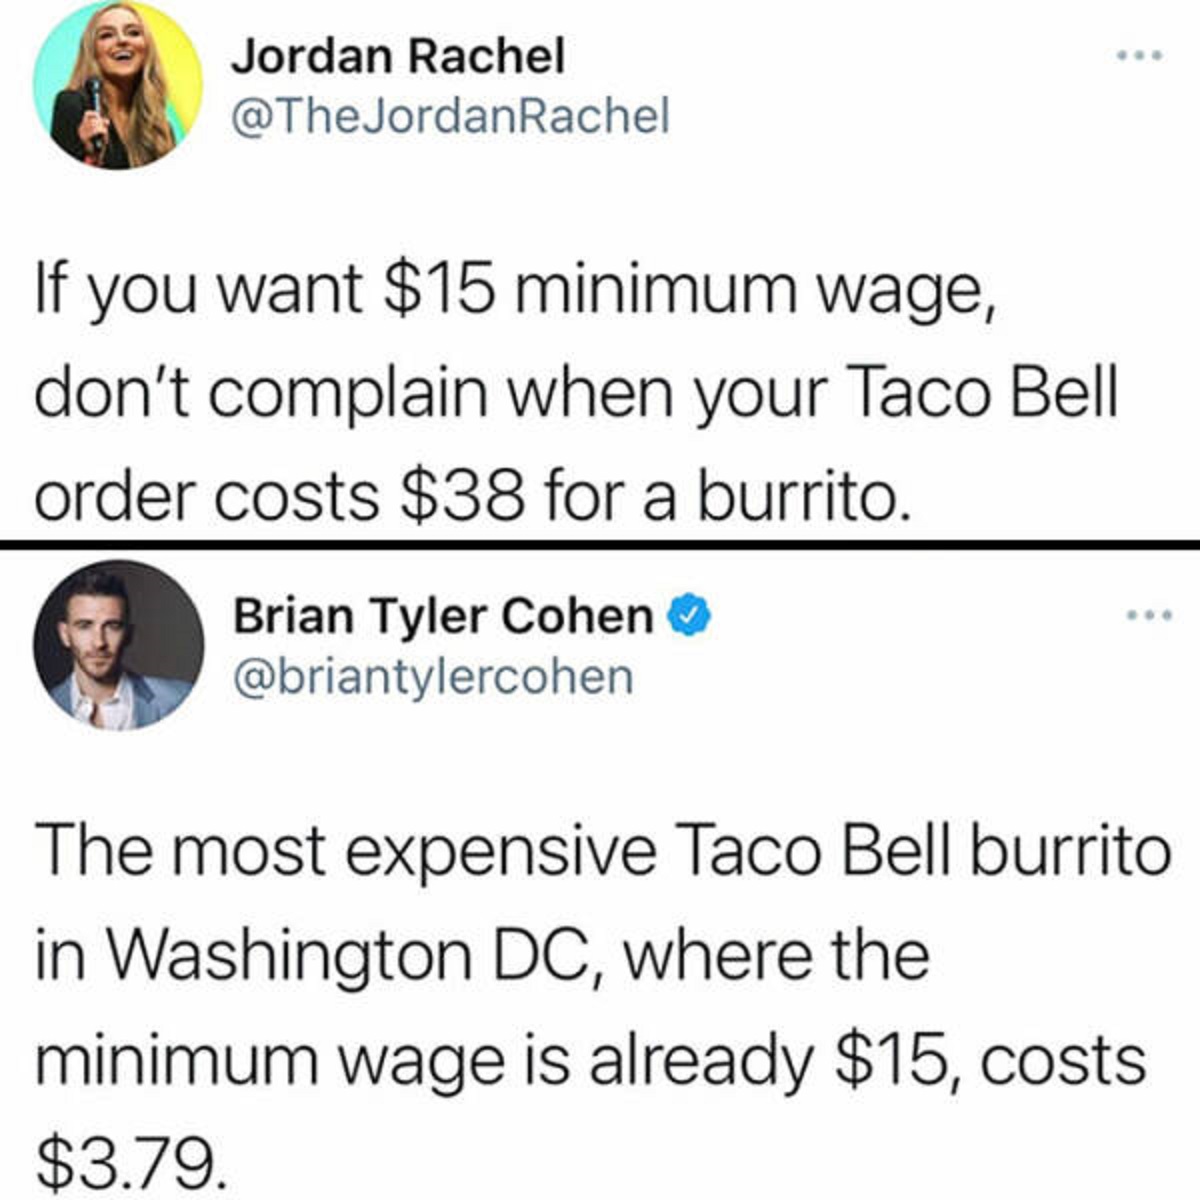 screenshot - Jordan Rachel If you want $15 minimum wage, don't complain when your Taco Bell order costs $38 for a burrito. Brian Tyler Cohen The most expensive Taco Bell burrito in Washington Dc, where the minimum wage is already $15, costs $3.79.